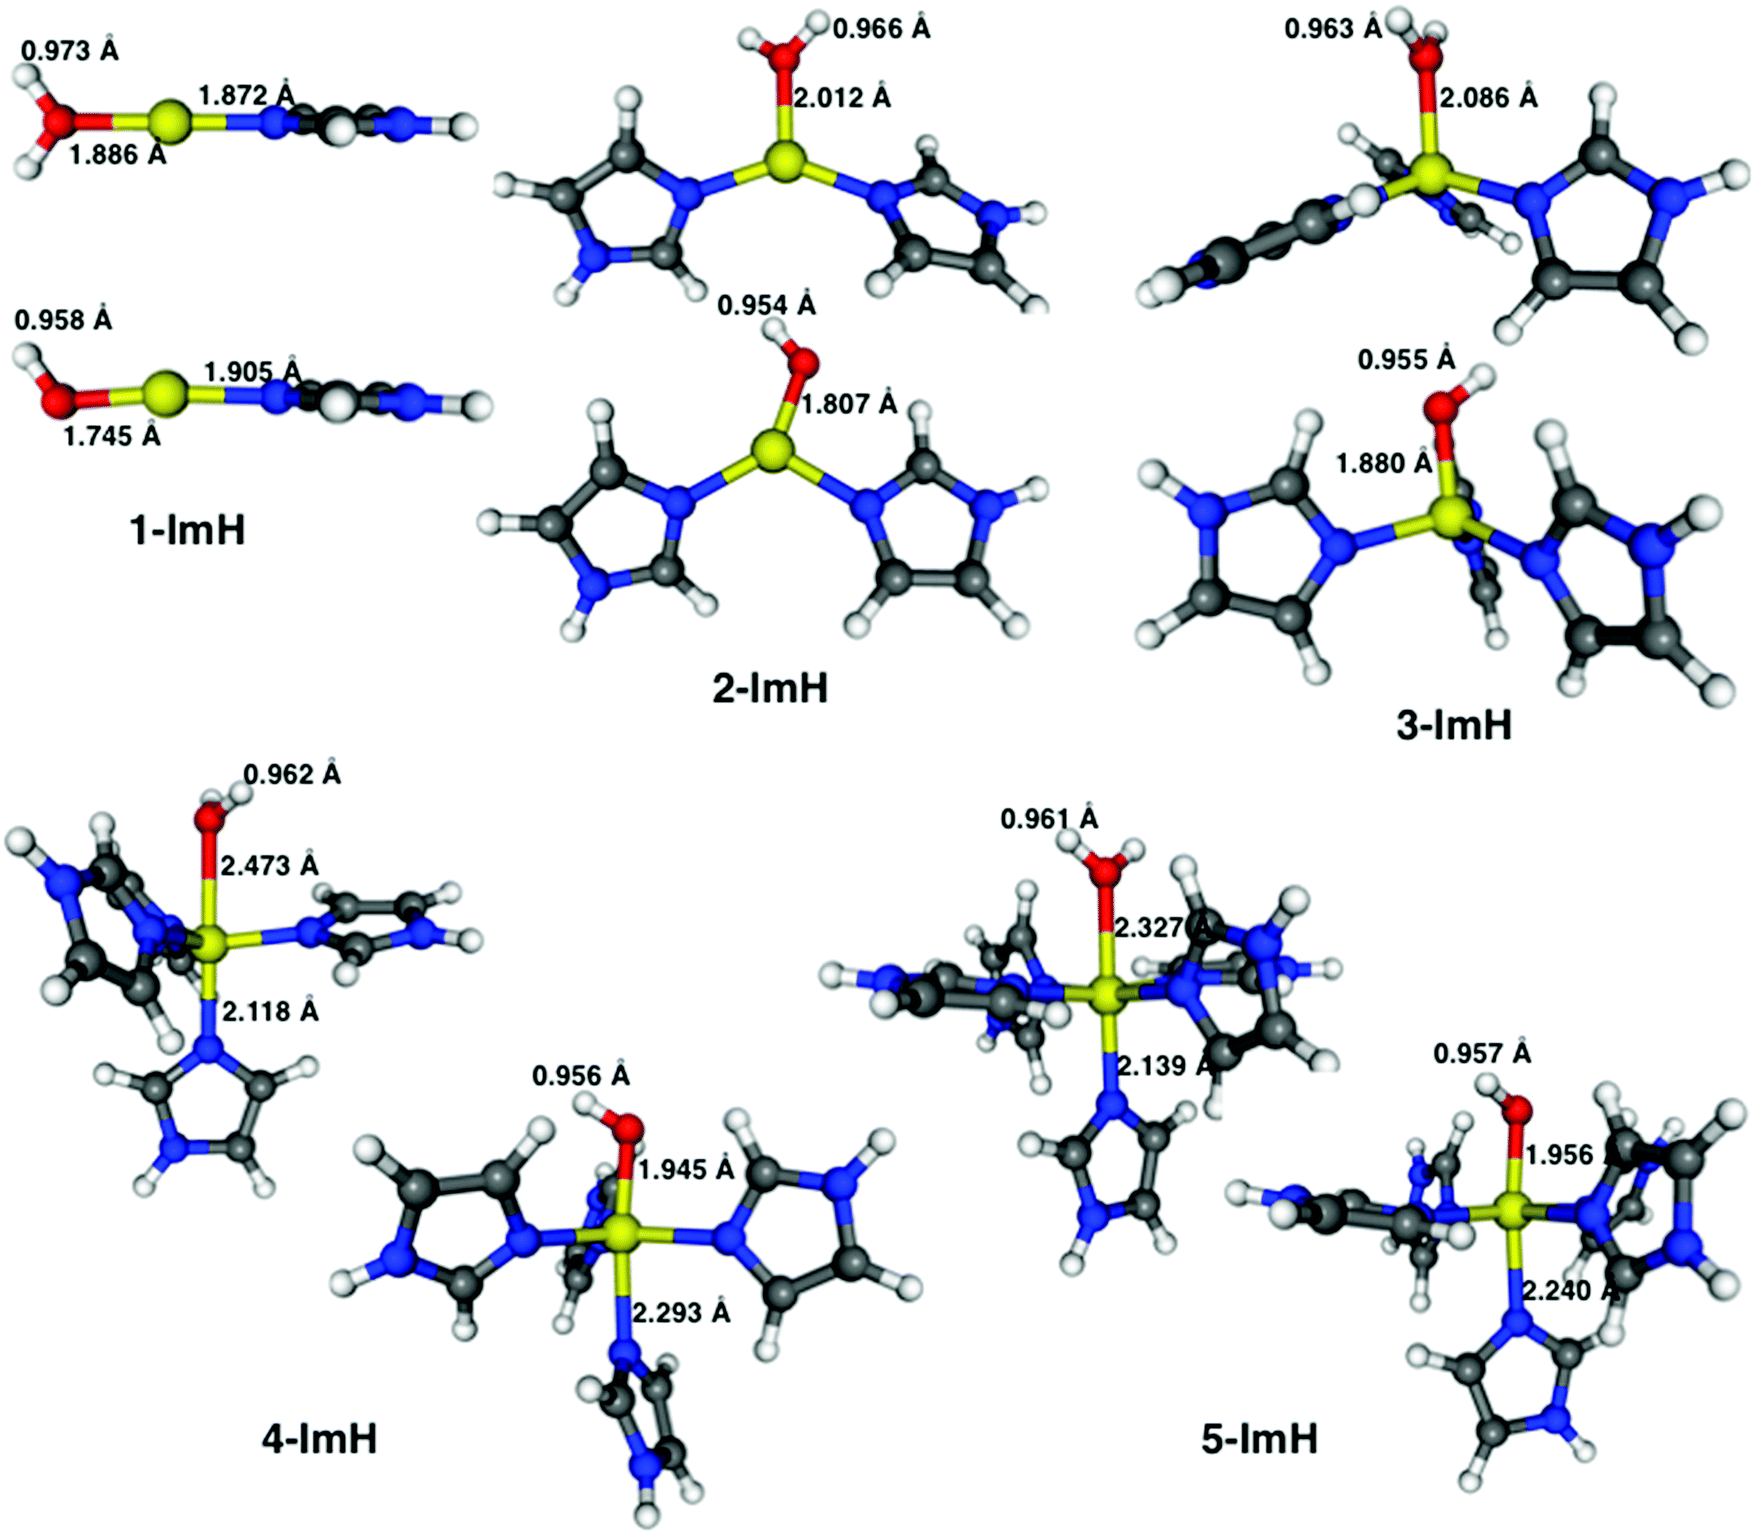 H 2 O Zn Imidazole N 2 The Vital Roles Of Coordination Number And Geometry In Zn Oh 2 Acidity And Catalytic Hydrolysis Physical Chemistry Chemical Physics Rsc Publishing Doi 10 1039 C8cpe